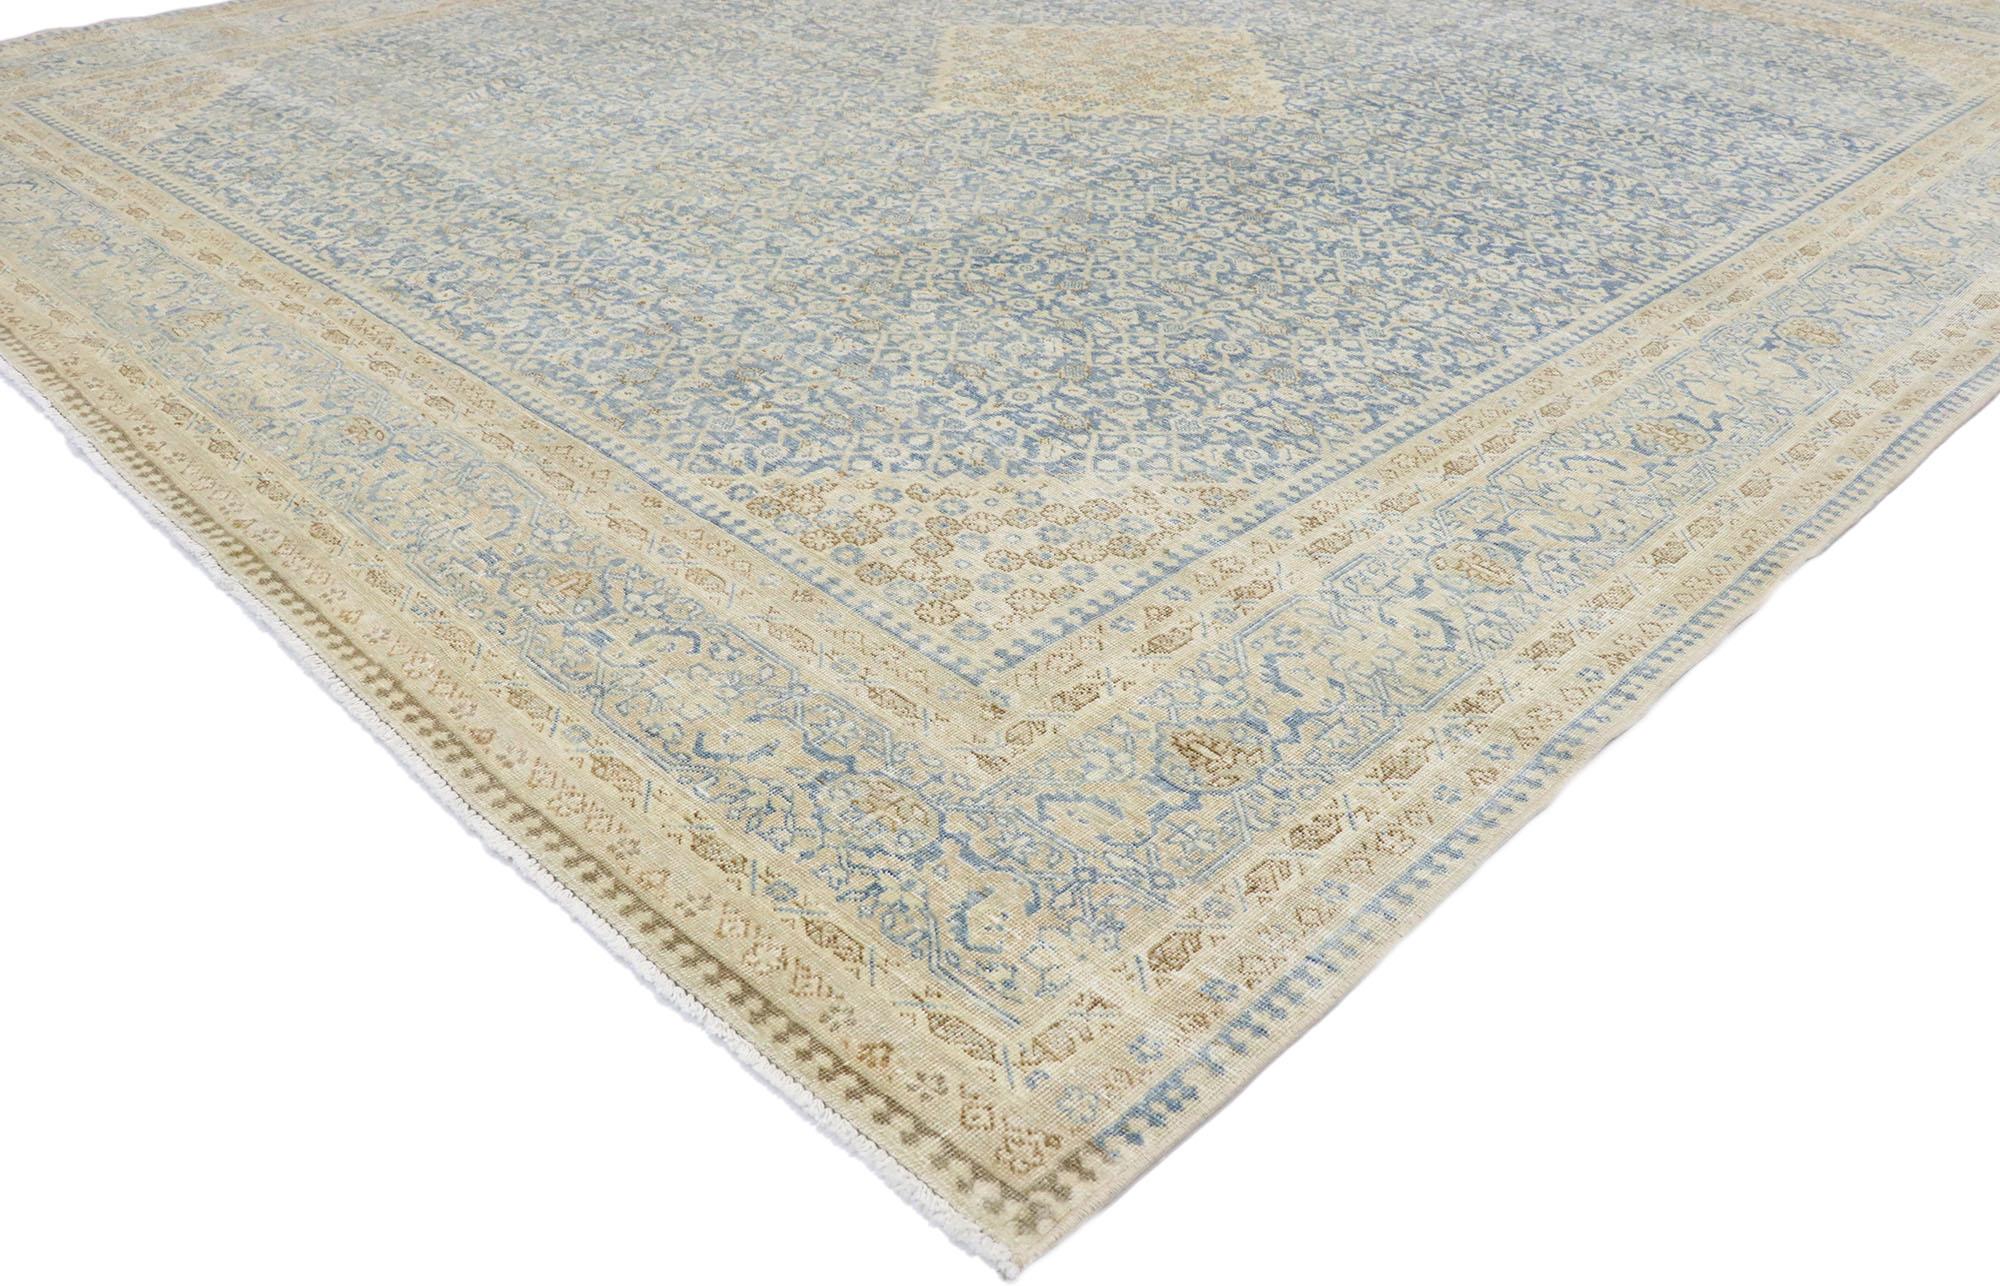 53477, distressed antique Persian Tabriz rug with Transitional Coastal style. Emanating coastal vibes with light and airy colors, this hand knotted wool distressed antique Persian Tabriz rug is a captivating vision of woven beauty. The light royal